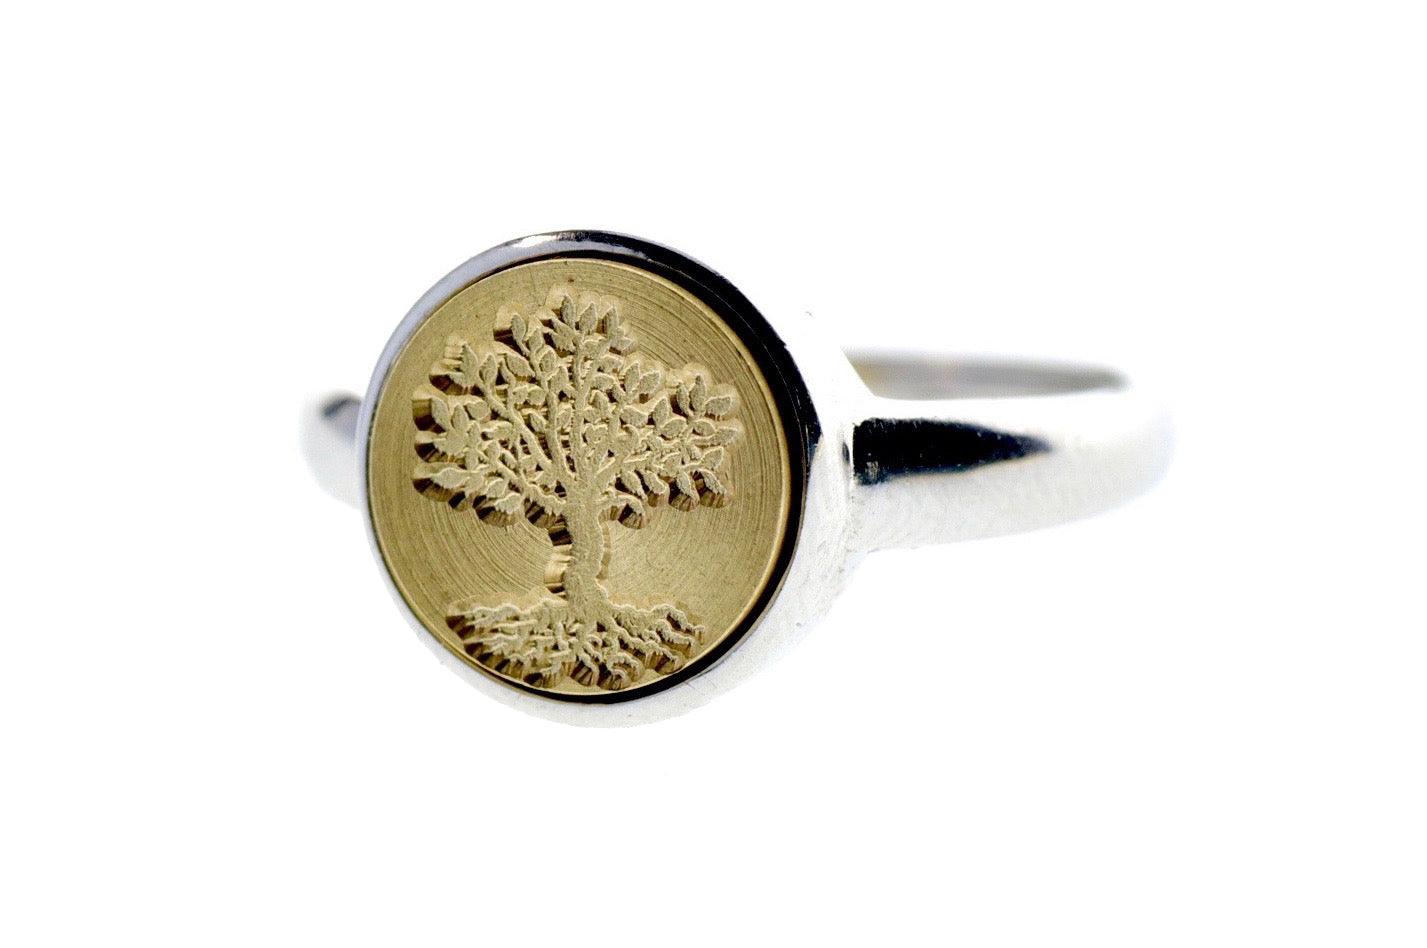 Tree of LIfe Signet Ring - Backtozero B20 - 10m, 10mm, 10mm ring, accessory, Grass Green, her, jewelry, minimal, Nature, ring, seal, seal ring, signet ring, simple, size 10, size 6, size 7, size 8, size 9, Tree, wax seal, wax seal ring, wax seal stamp